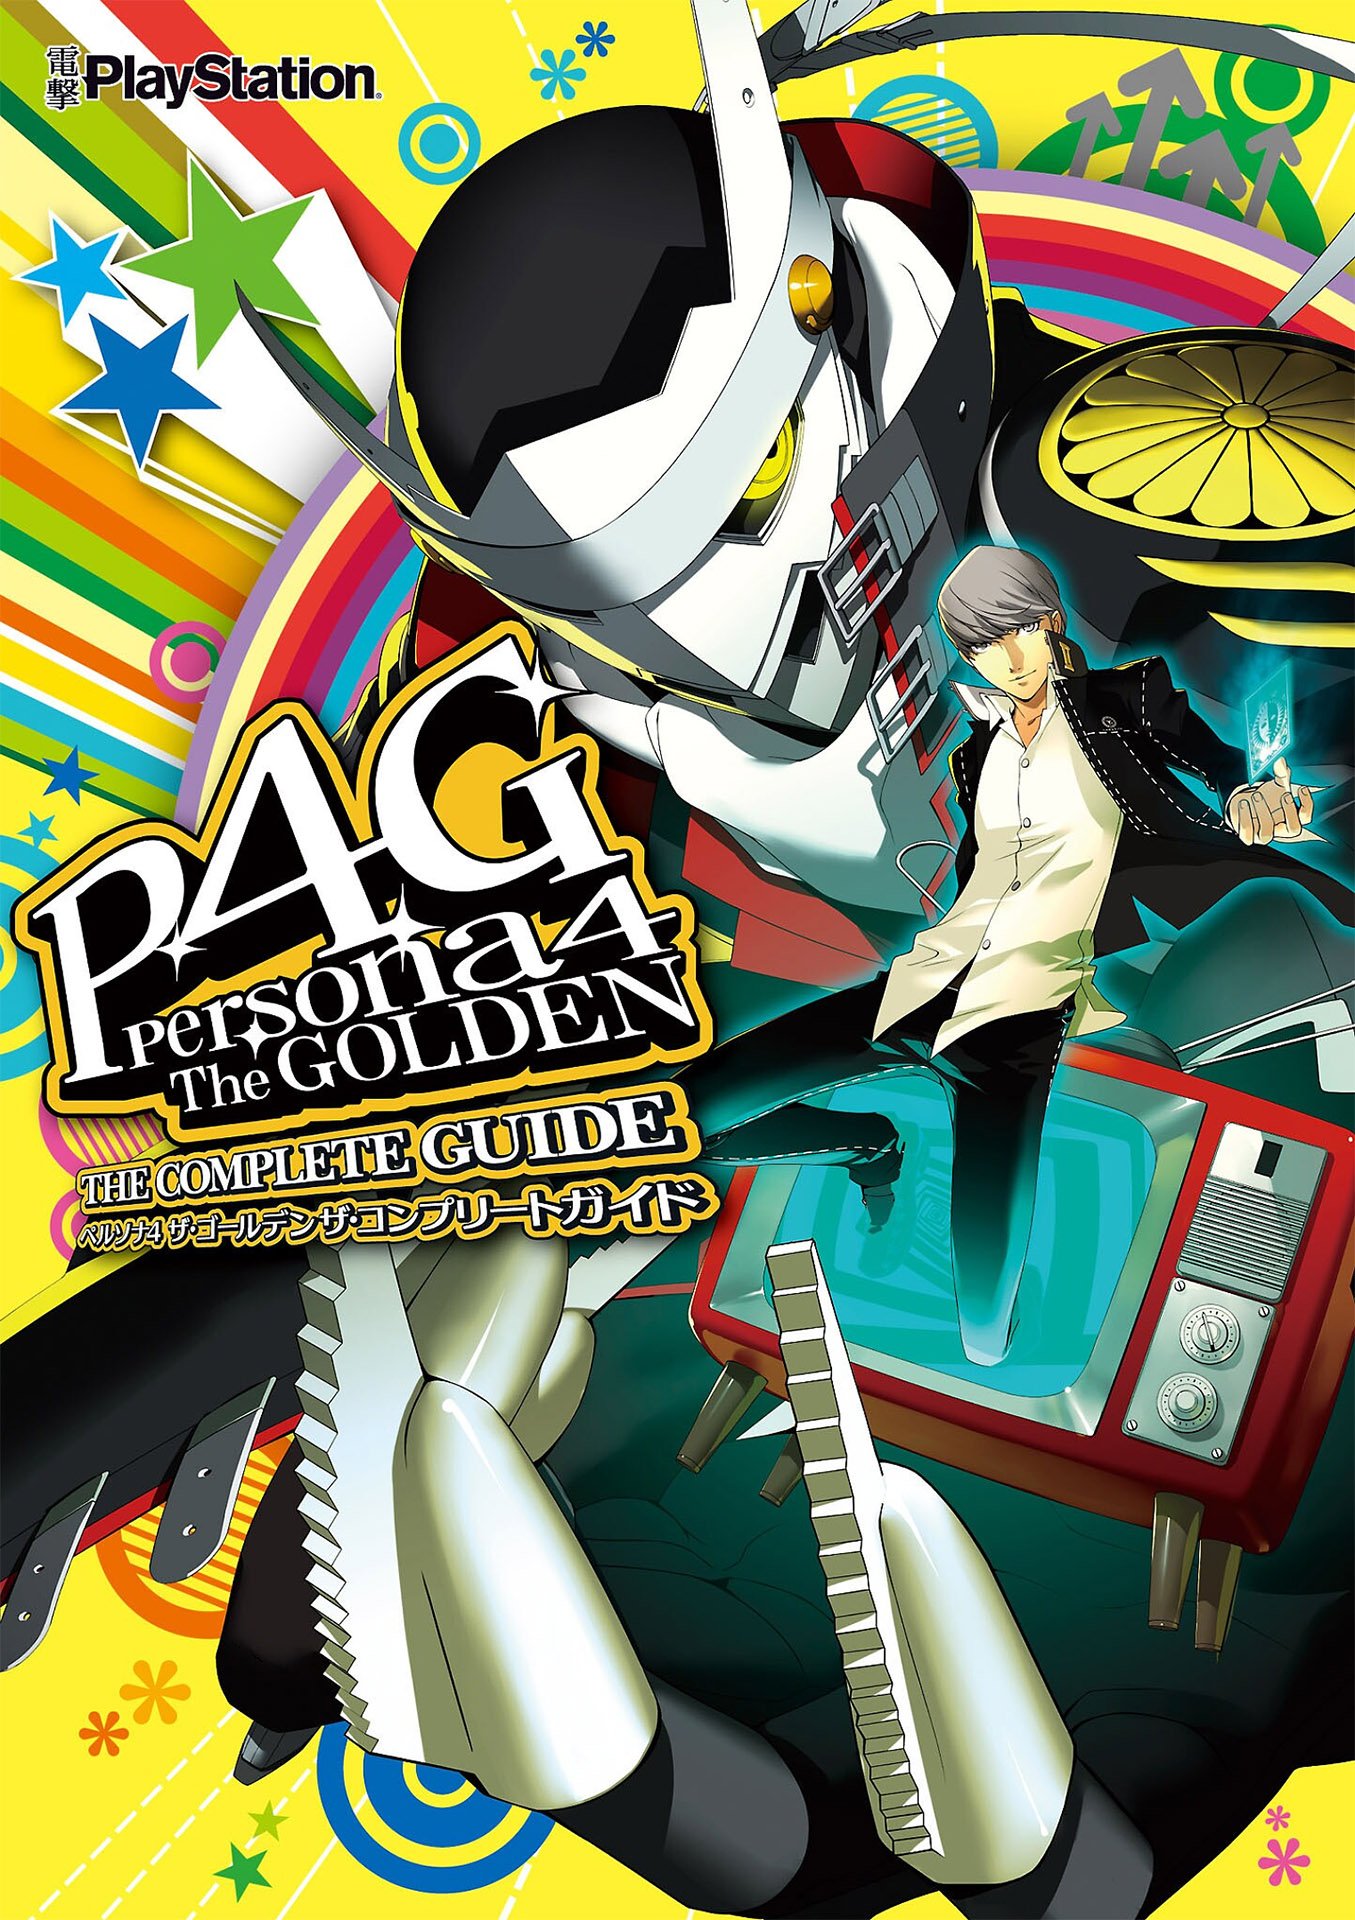 Persona 4: The Golden - The Complete Guide - Japanese Language Guides ...